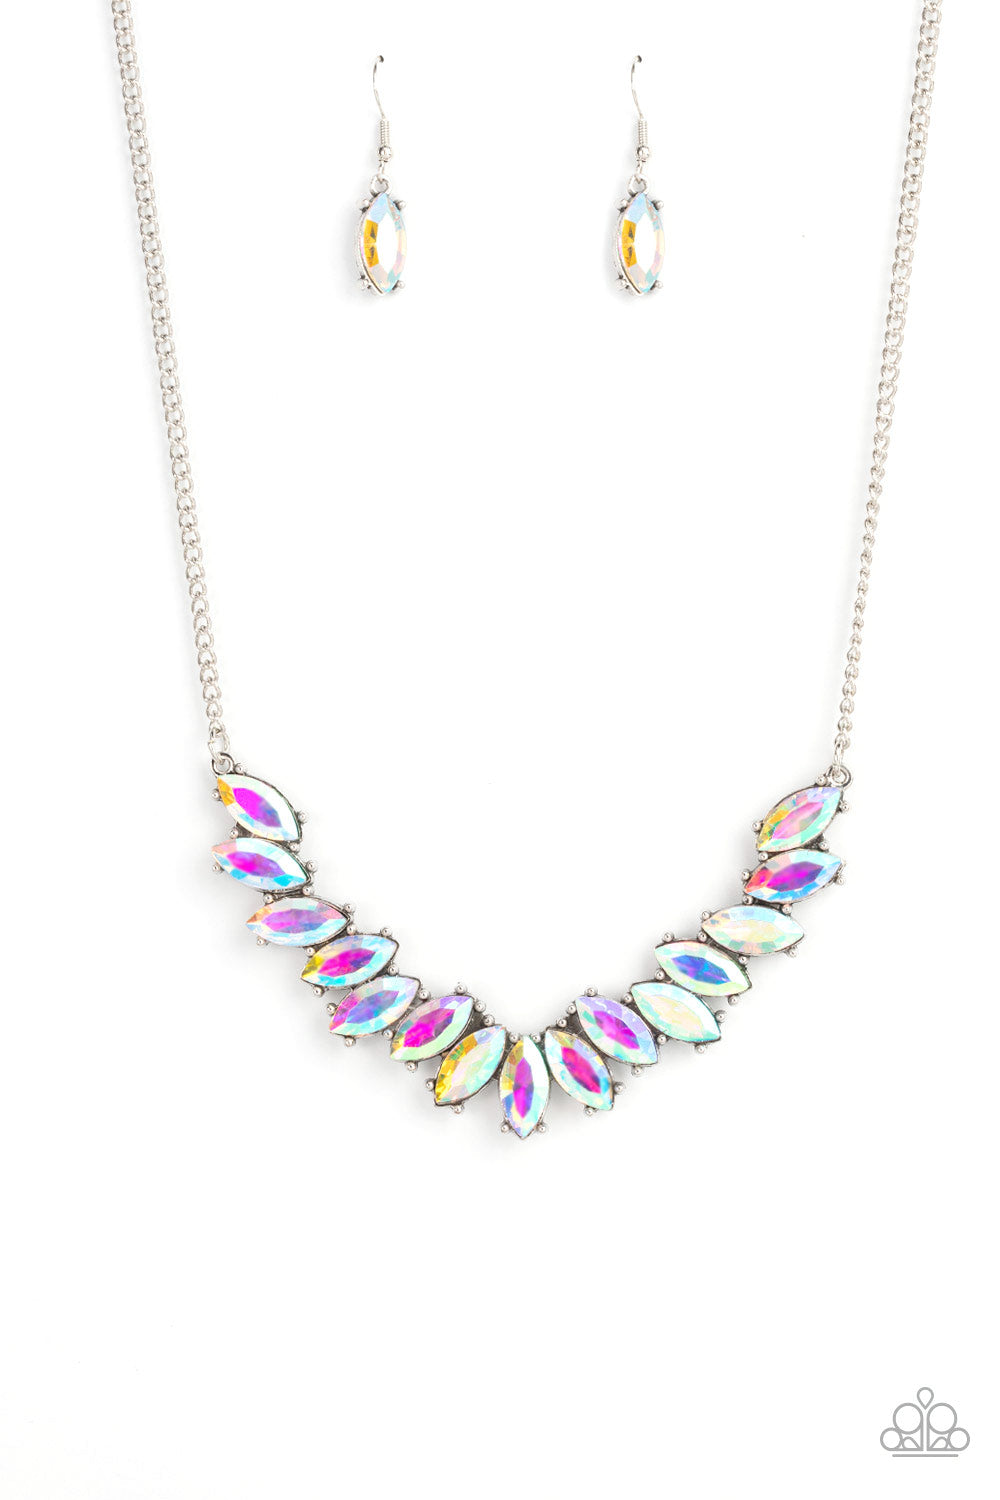 Galaxy Game-Changer Multi Necklace - Paparazzi Accessories  Featuring pronged silver fittings, a sparkly series of iridescent marquise cut rhinestones fan out below the collar for a stellar statement-making look. Features an adjustable clasp closure.  Sold as one individual necklace. Includes one pair of matching earrings.